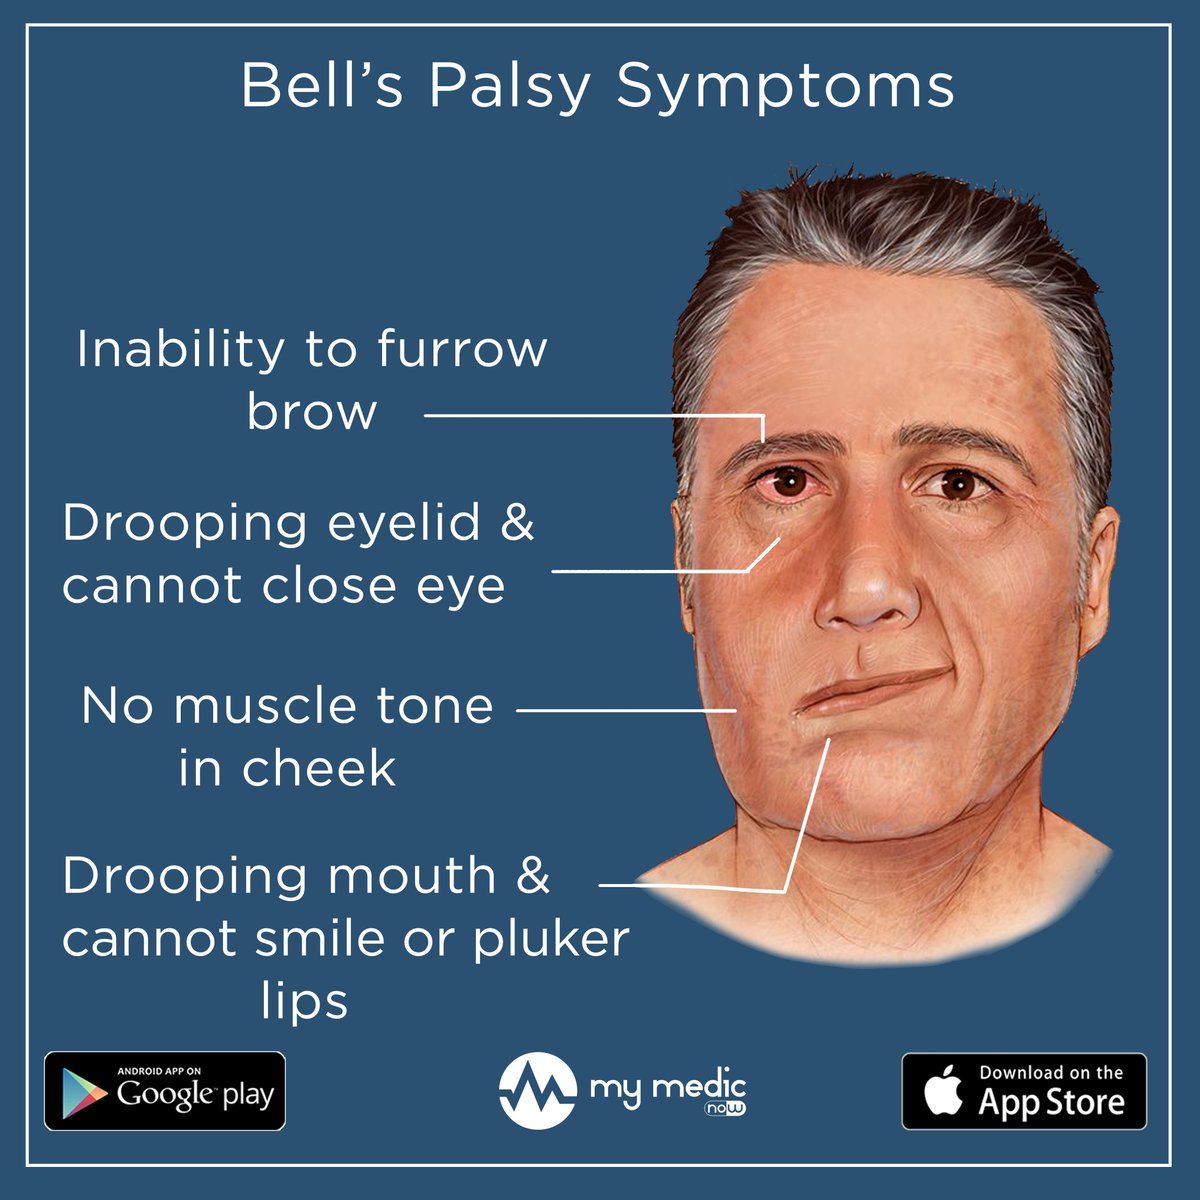 Bell's palsy is a condition in which the muscles on one side of your face become weak or paralyzedFind the best doctor near you on mymedicnow. Download 
 #BellsPalsy #Symptoms #Health #HealthierLife #Hospital #Dubai #UAE #AbuDhabi #DubaiClinics #Healthtip #OnlineAppointment